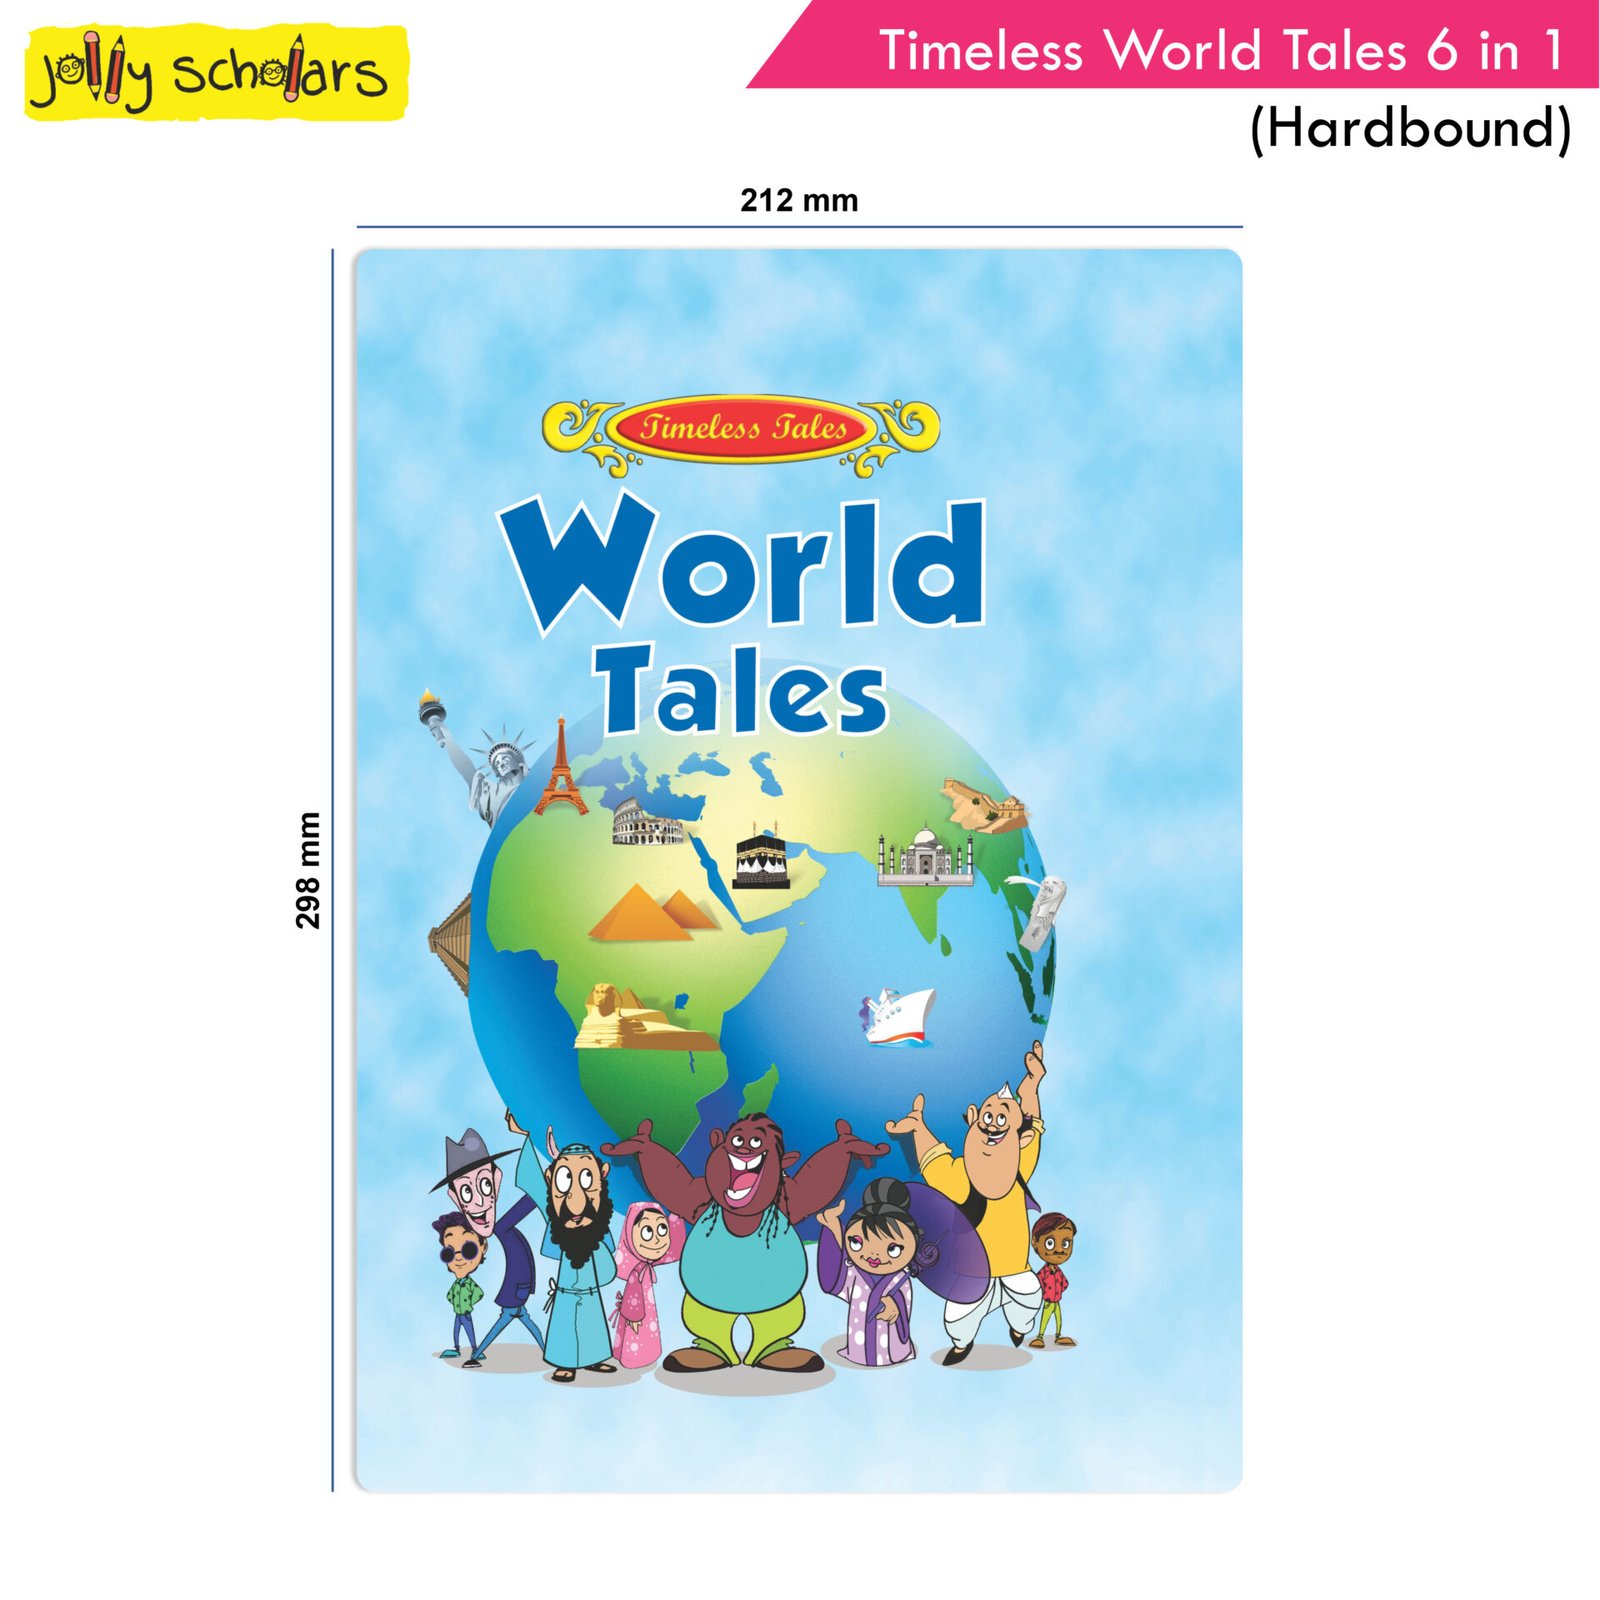 Jolly Scholars Timeless World Tales 6 in 1 Hard Bound 2